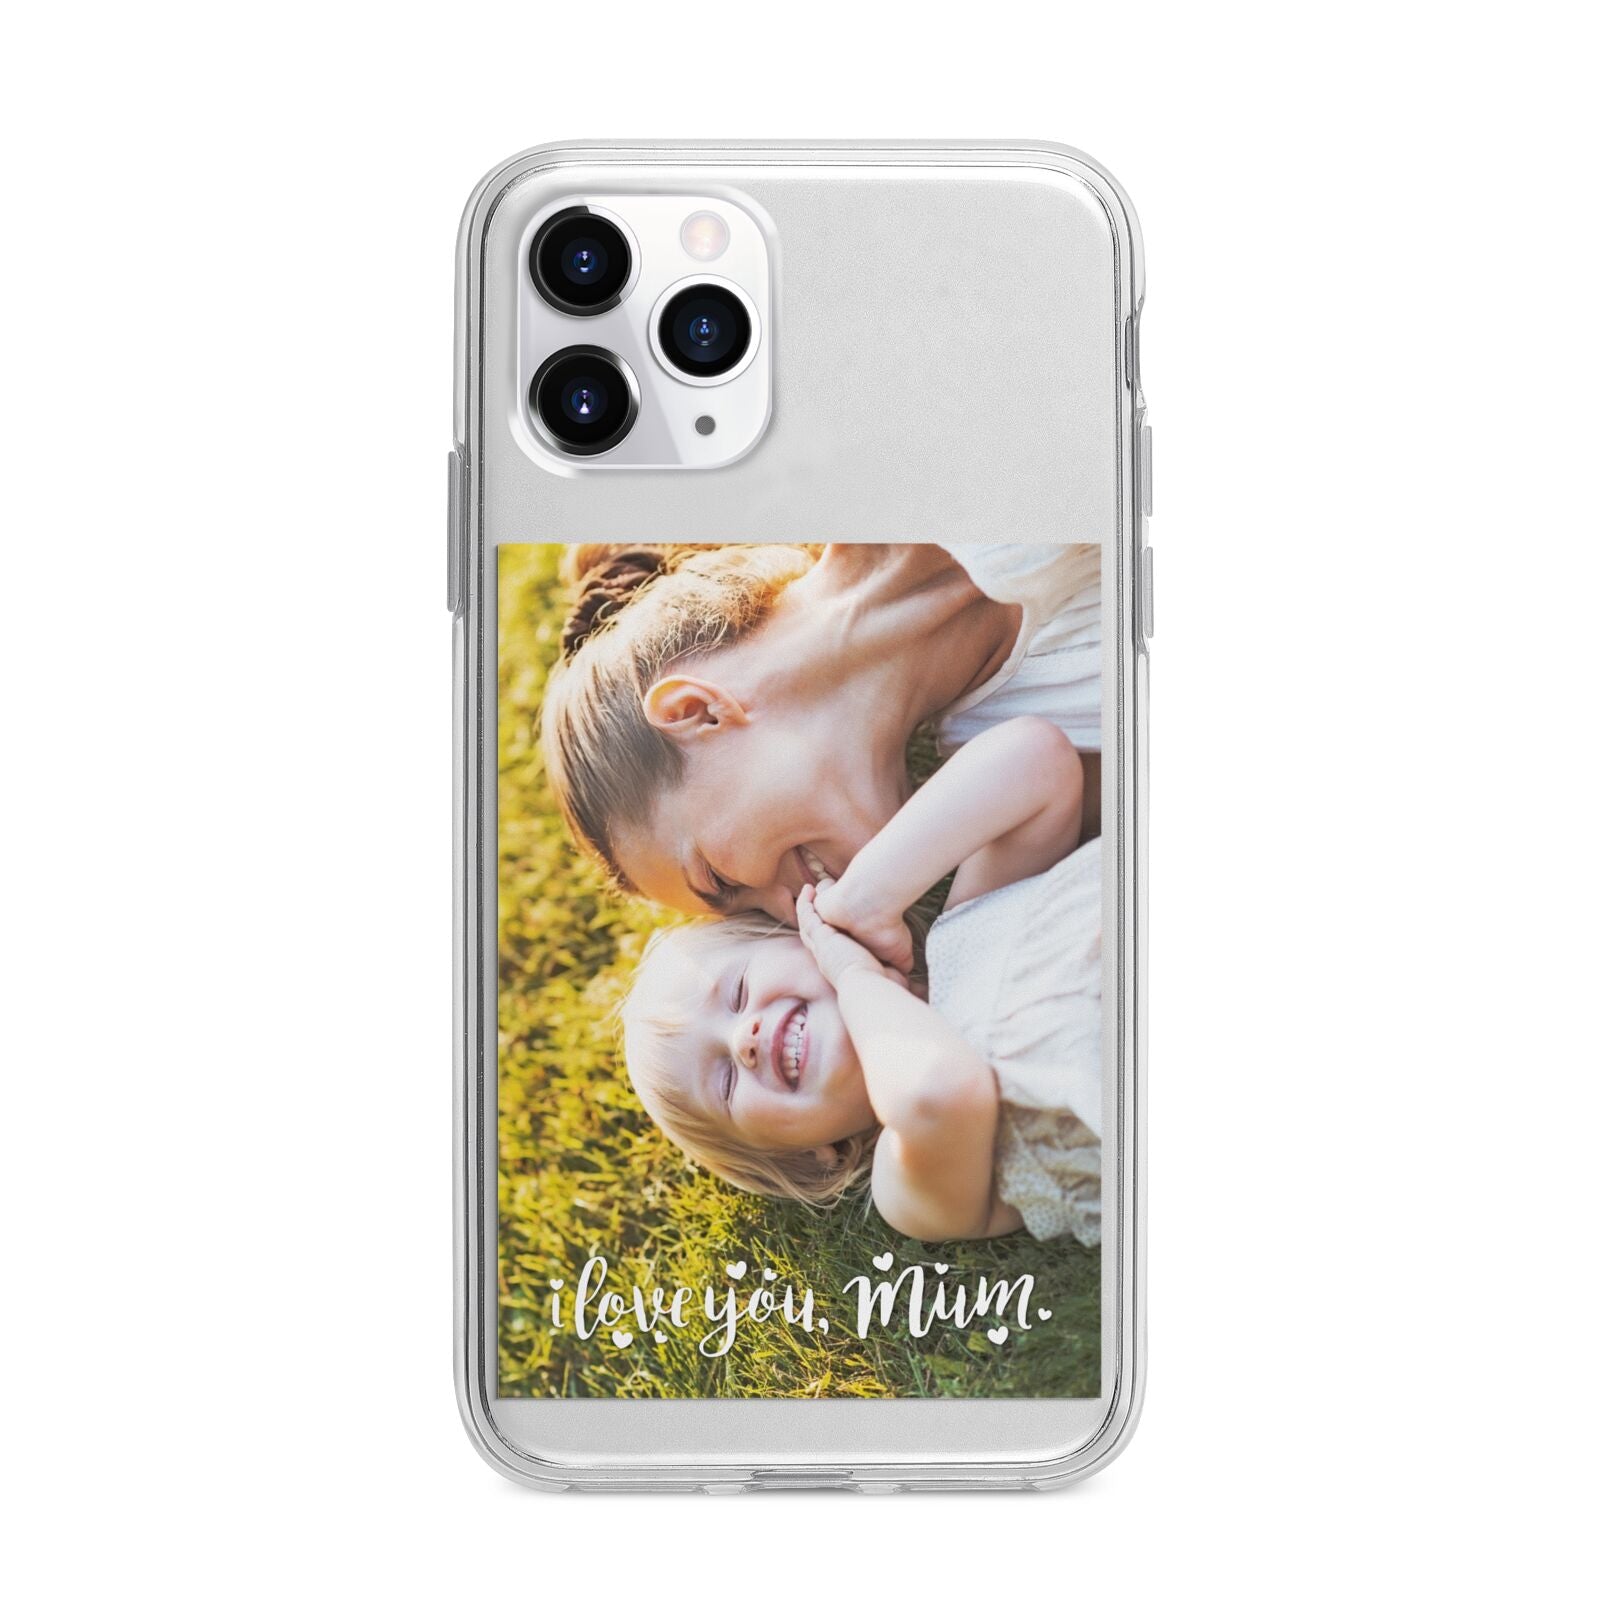 Love You Mum Photo Upload Apple iPhone 11 Pro Max in Silver with Bumper Case